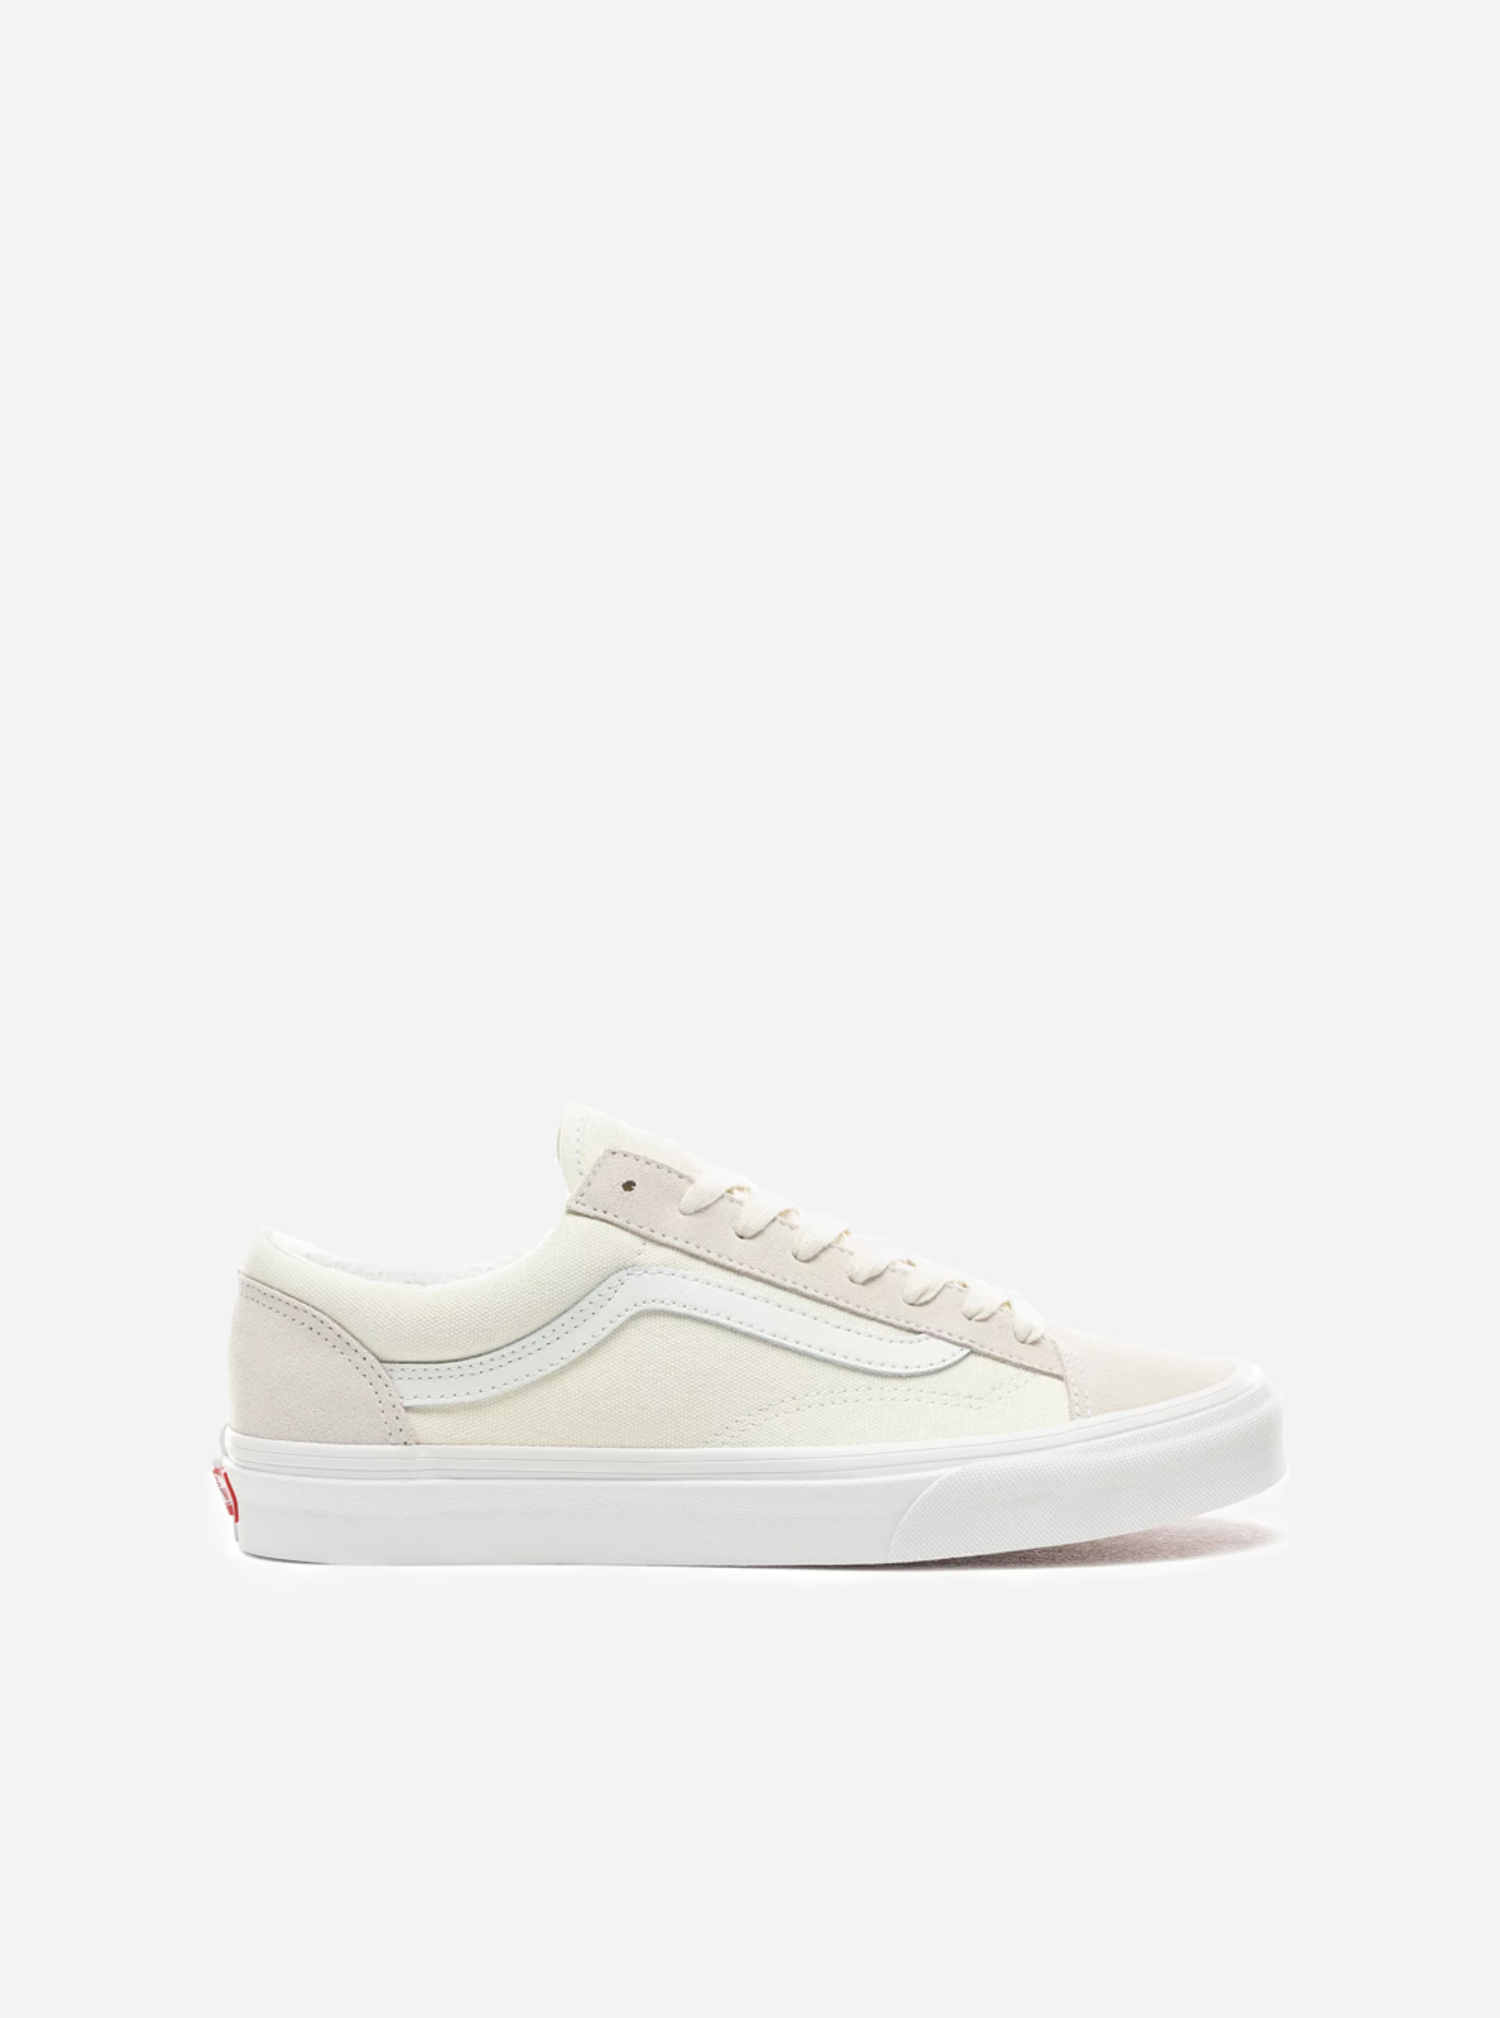 vans style 36 classic white Off 72 